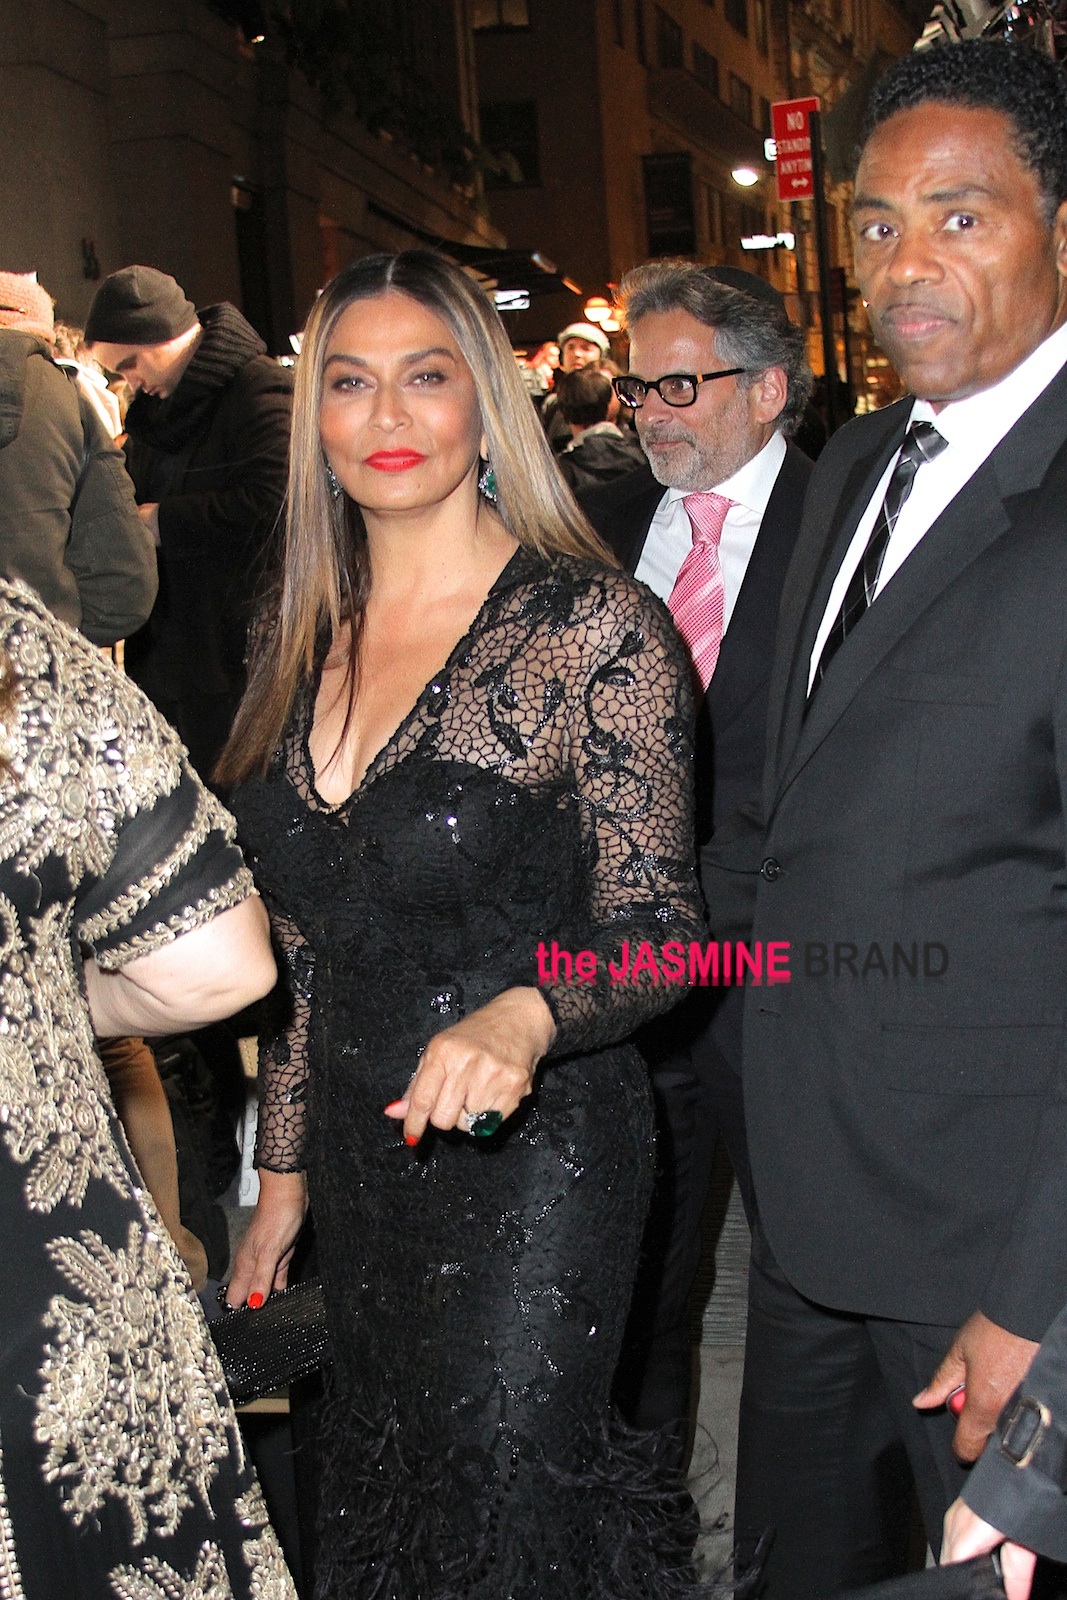 Tina Knowles introduces Lorraine Schwartz to a mystery man at Angel Ball